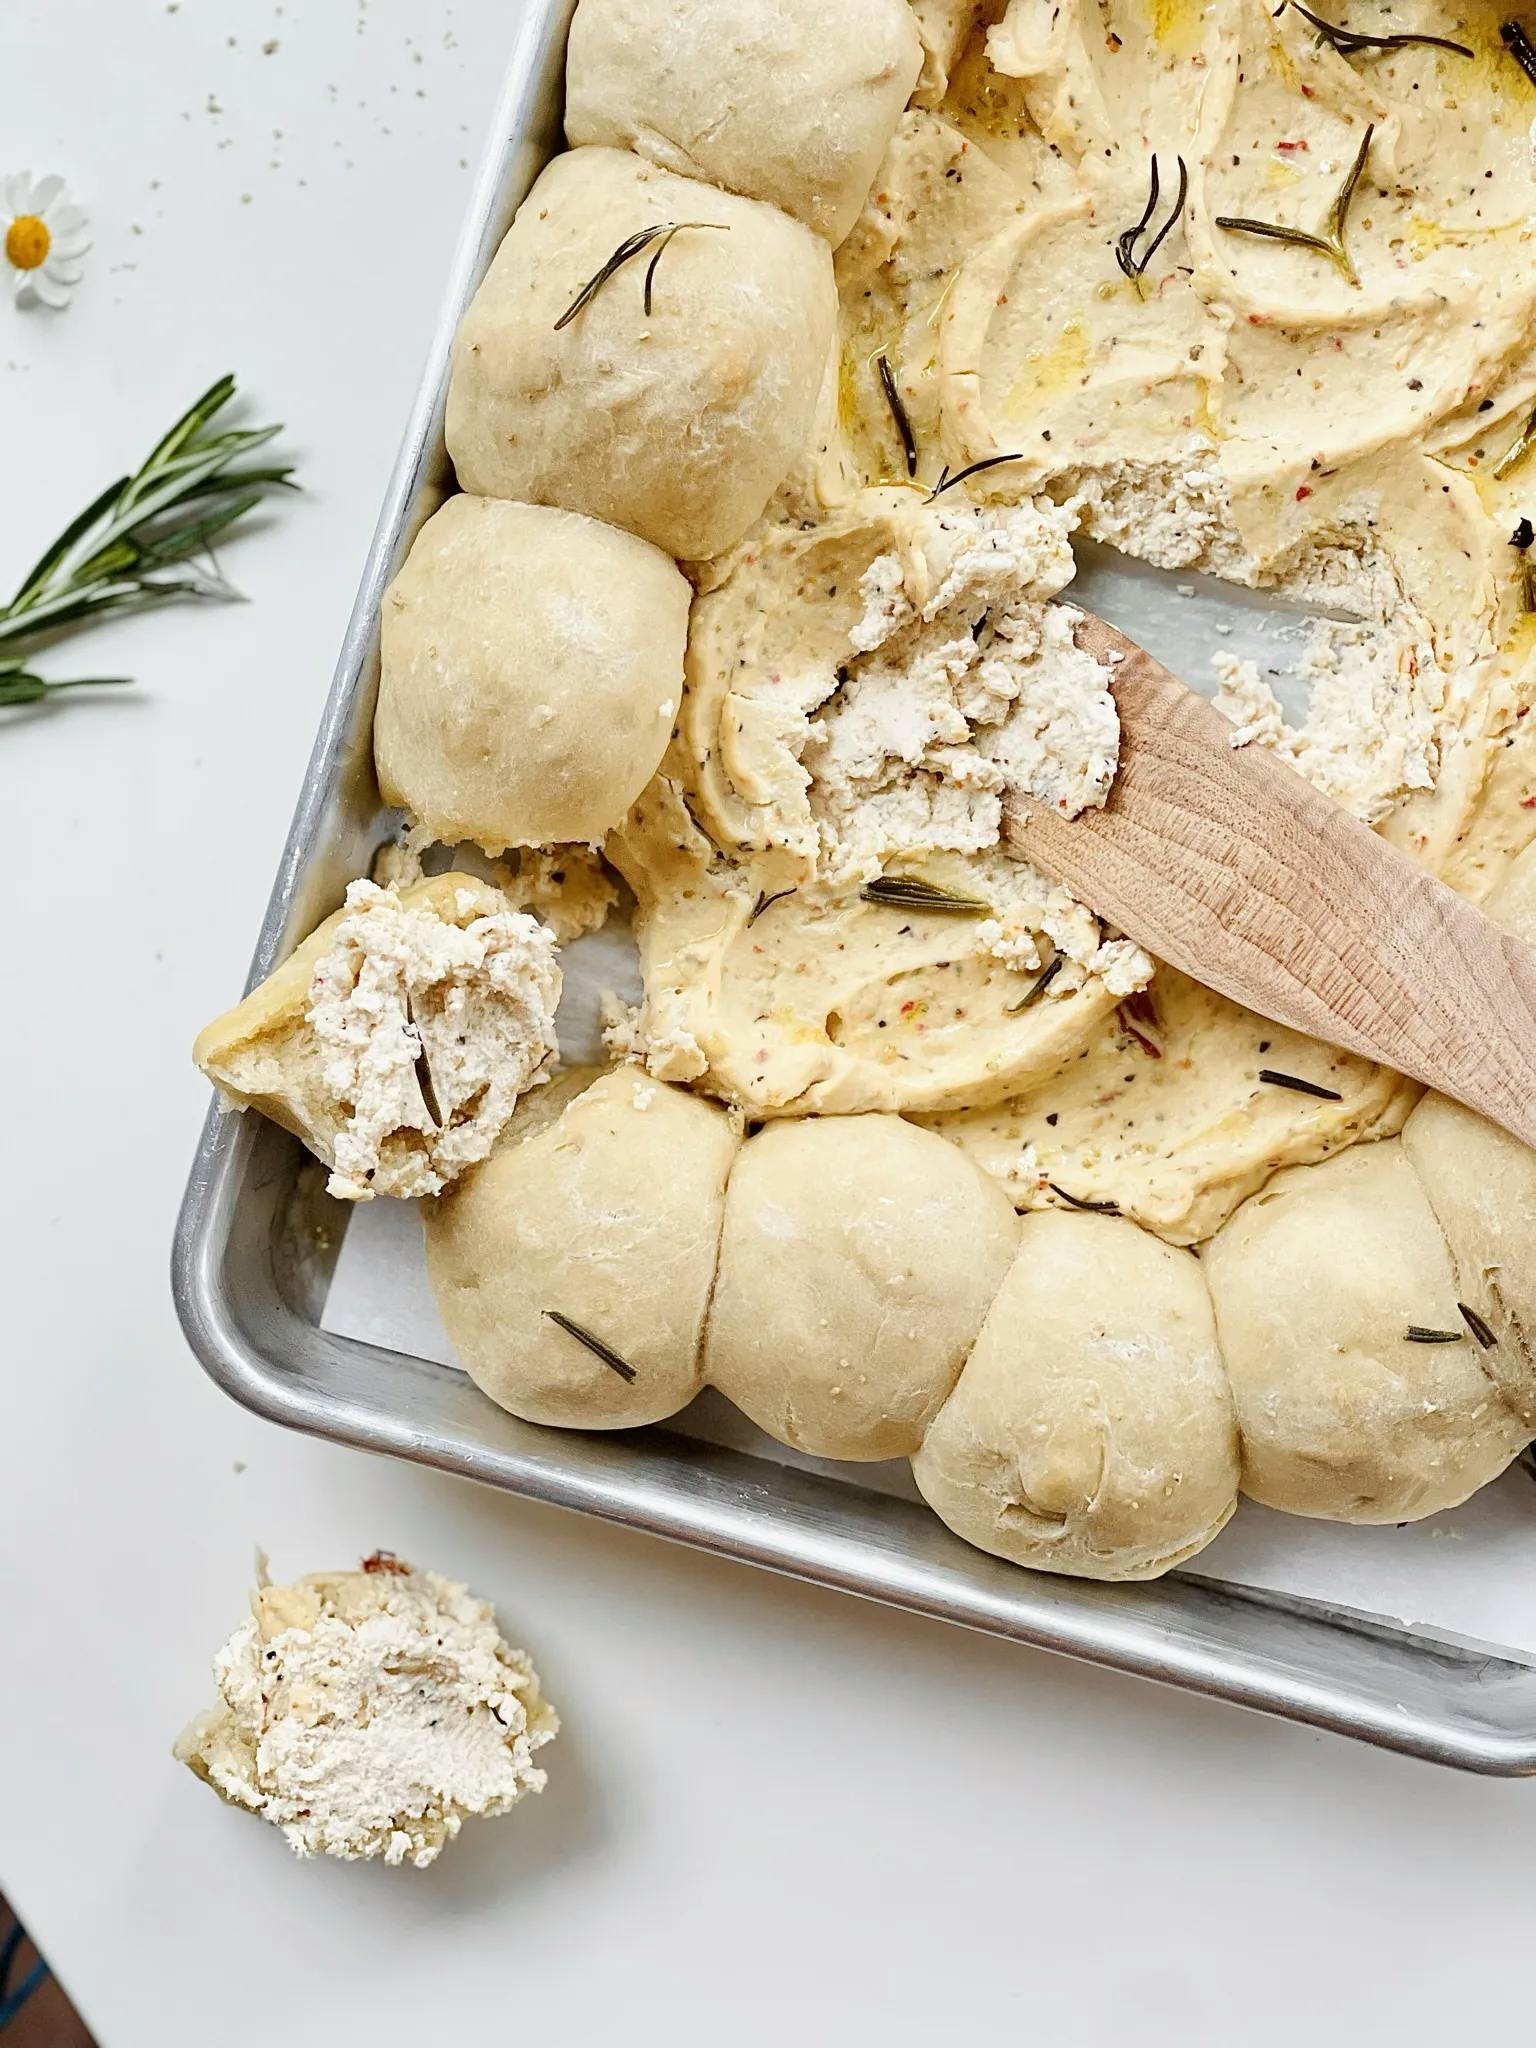 Picture for Sheet Pan Rosemary Goat Cheese Spread & Pizza Rolls